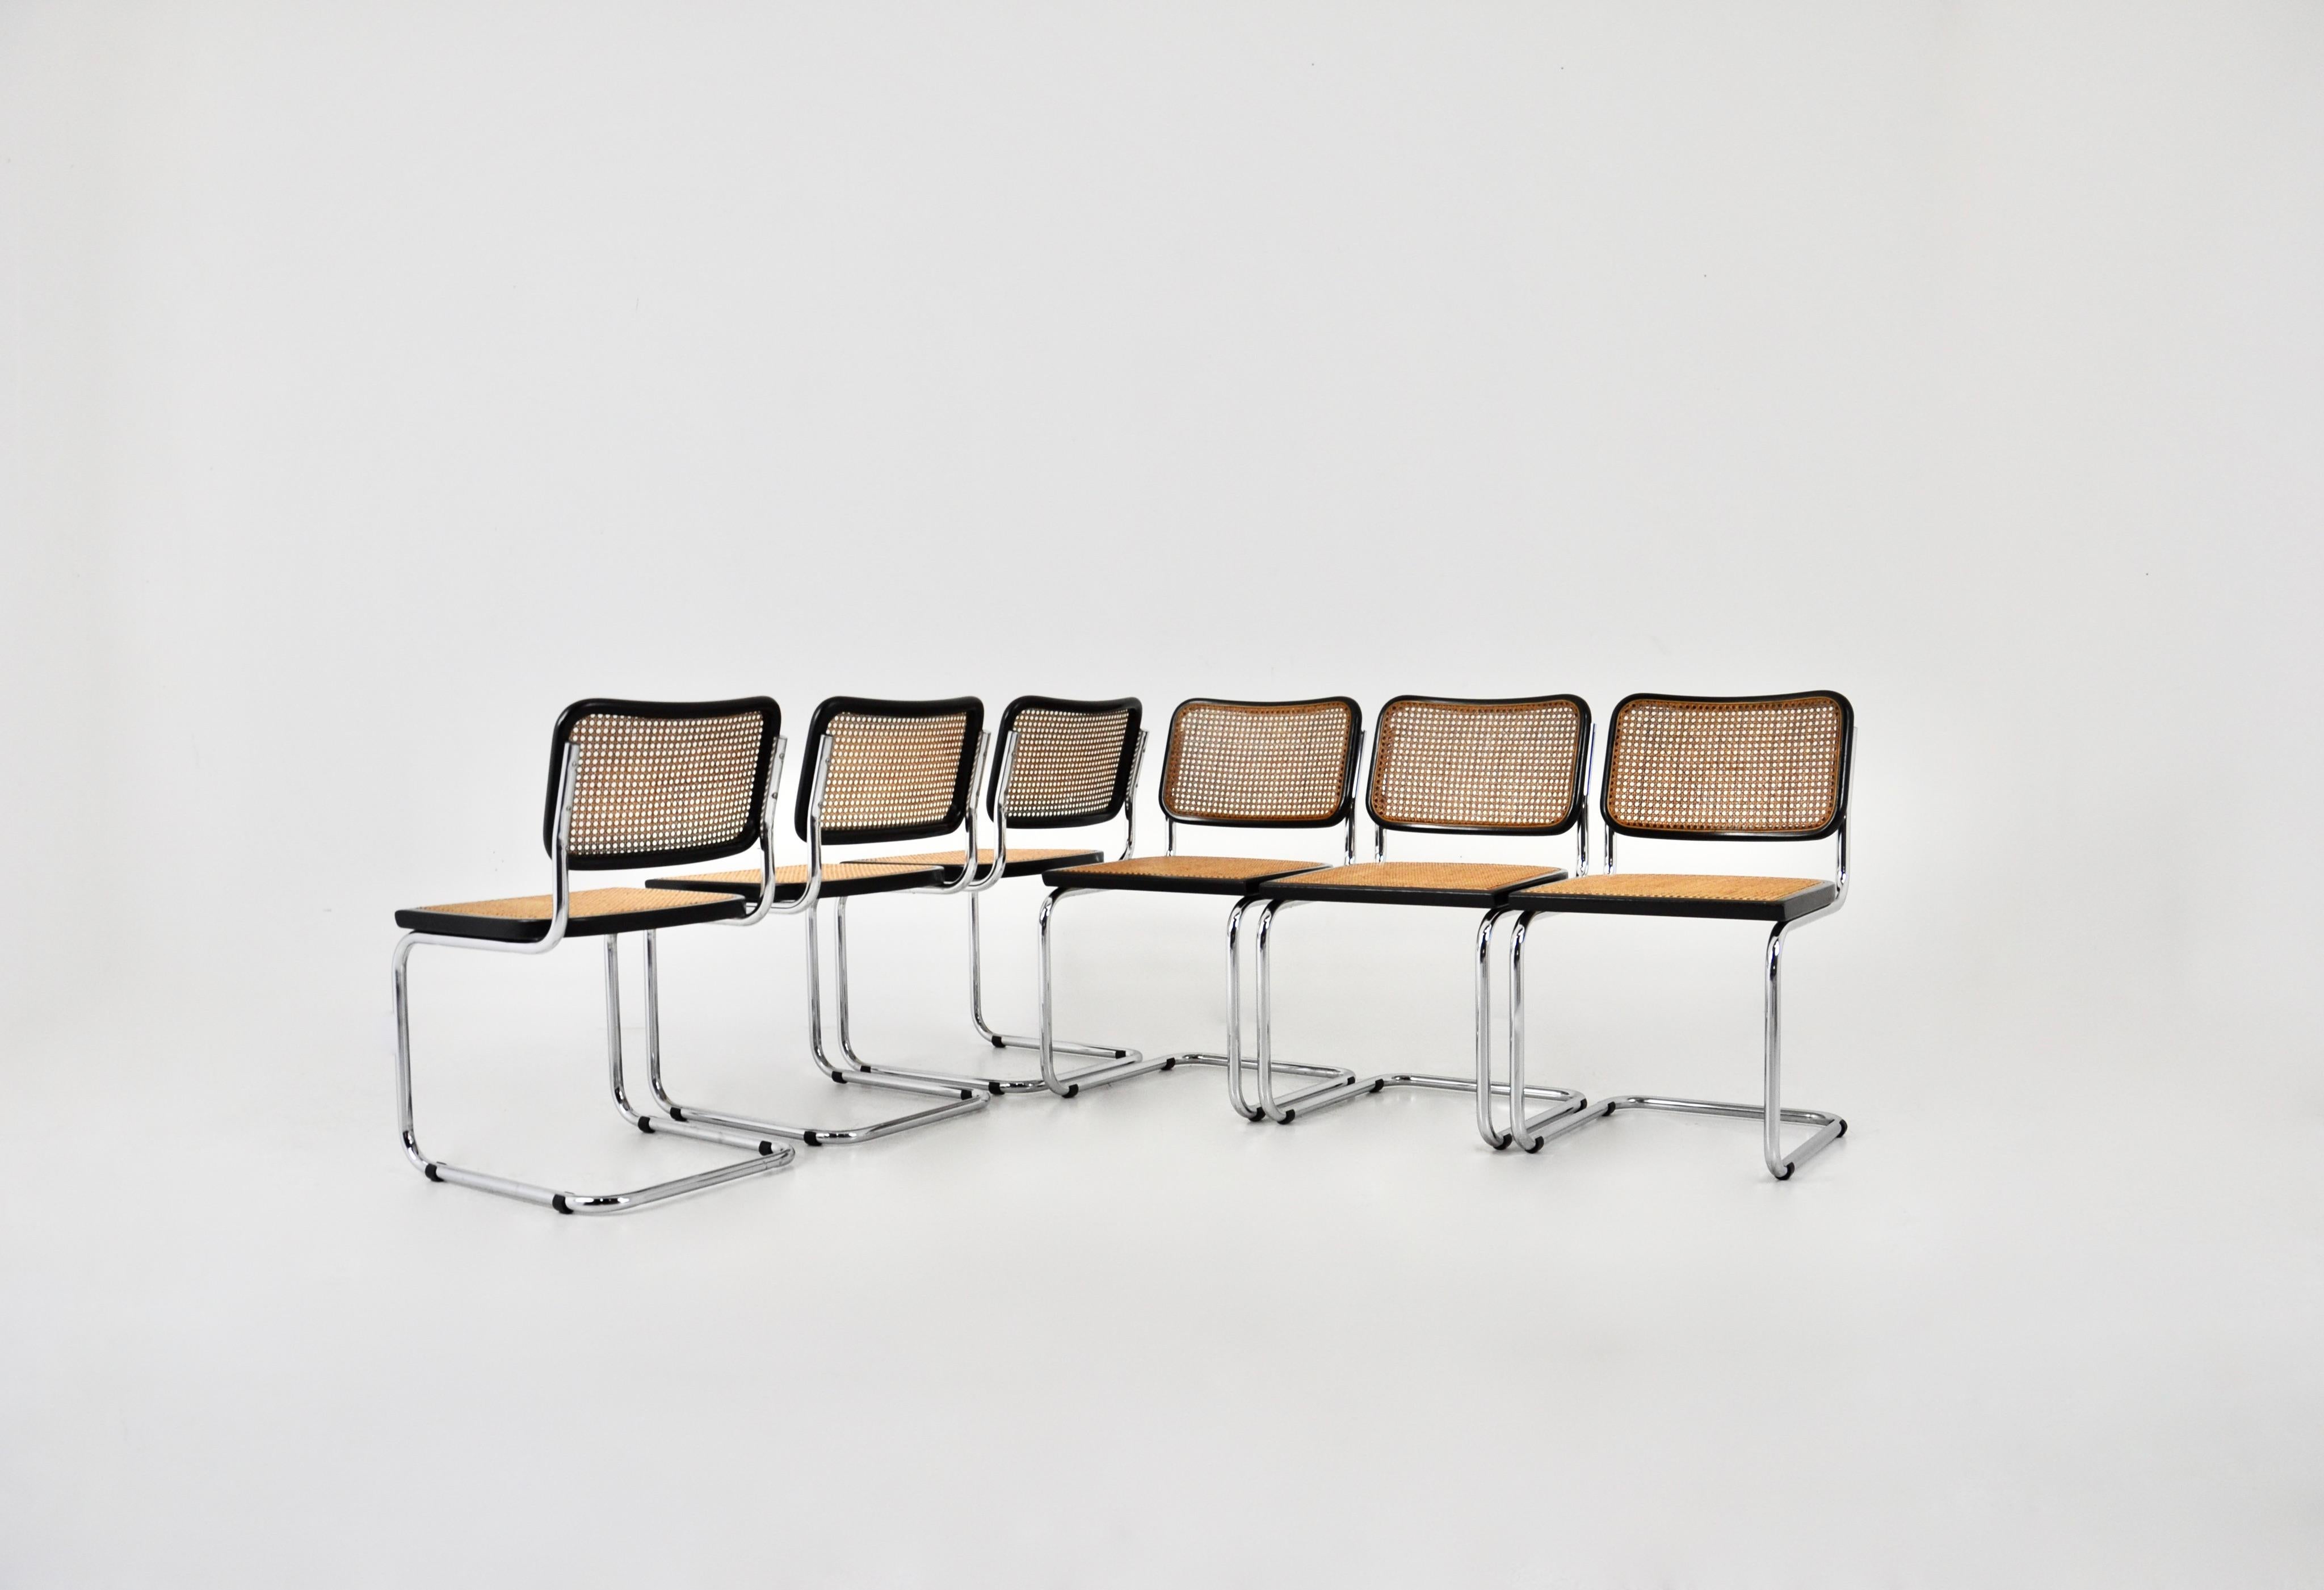 Set of 6 chairs in metal, wood and rattan. Dimensions: seat height: 46 cm. Wear due to time and age of the chairs. Sold by 6, the set cannot be divided.